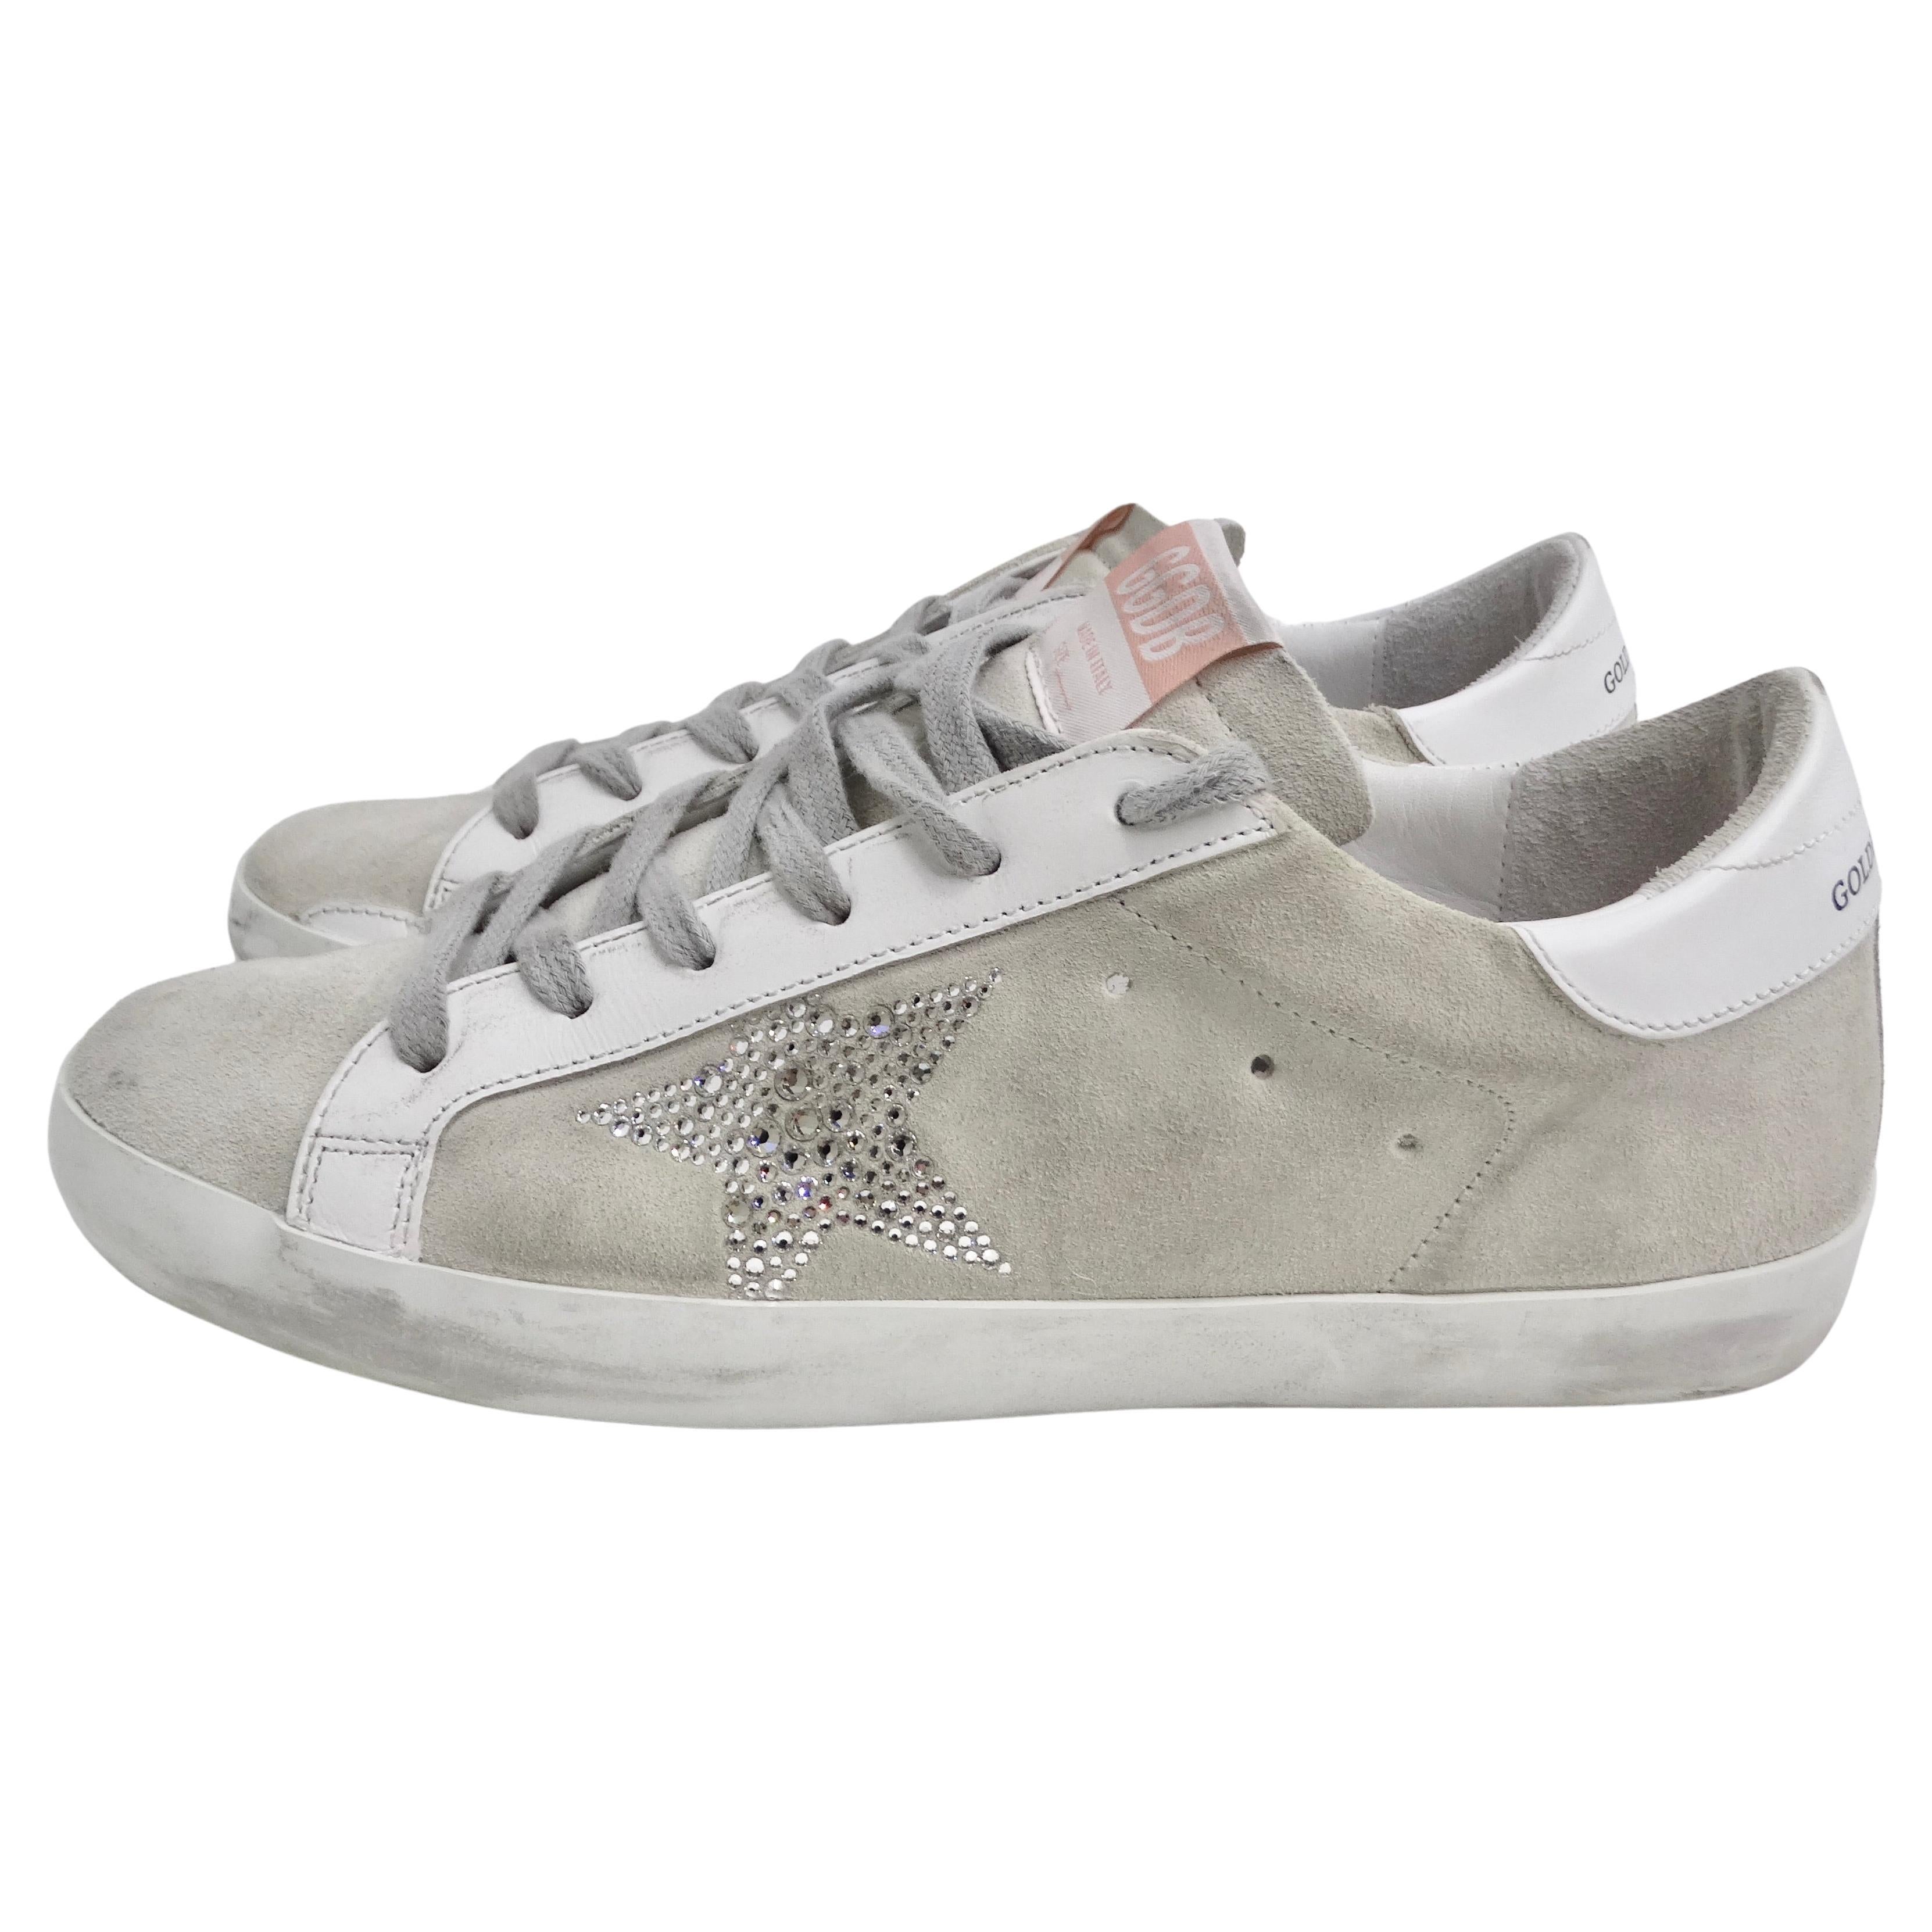 Golden Goose Sneakers - 11 For Sale on 1stDibs | golden goose sneakers  sale, golden goose sale, golden goose shoes